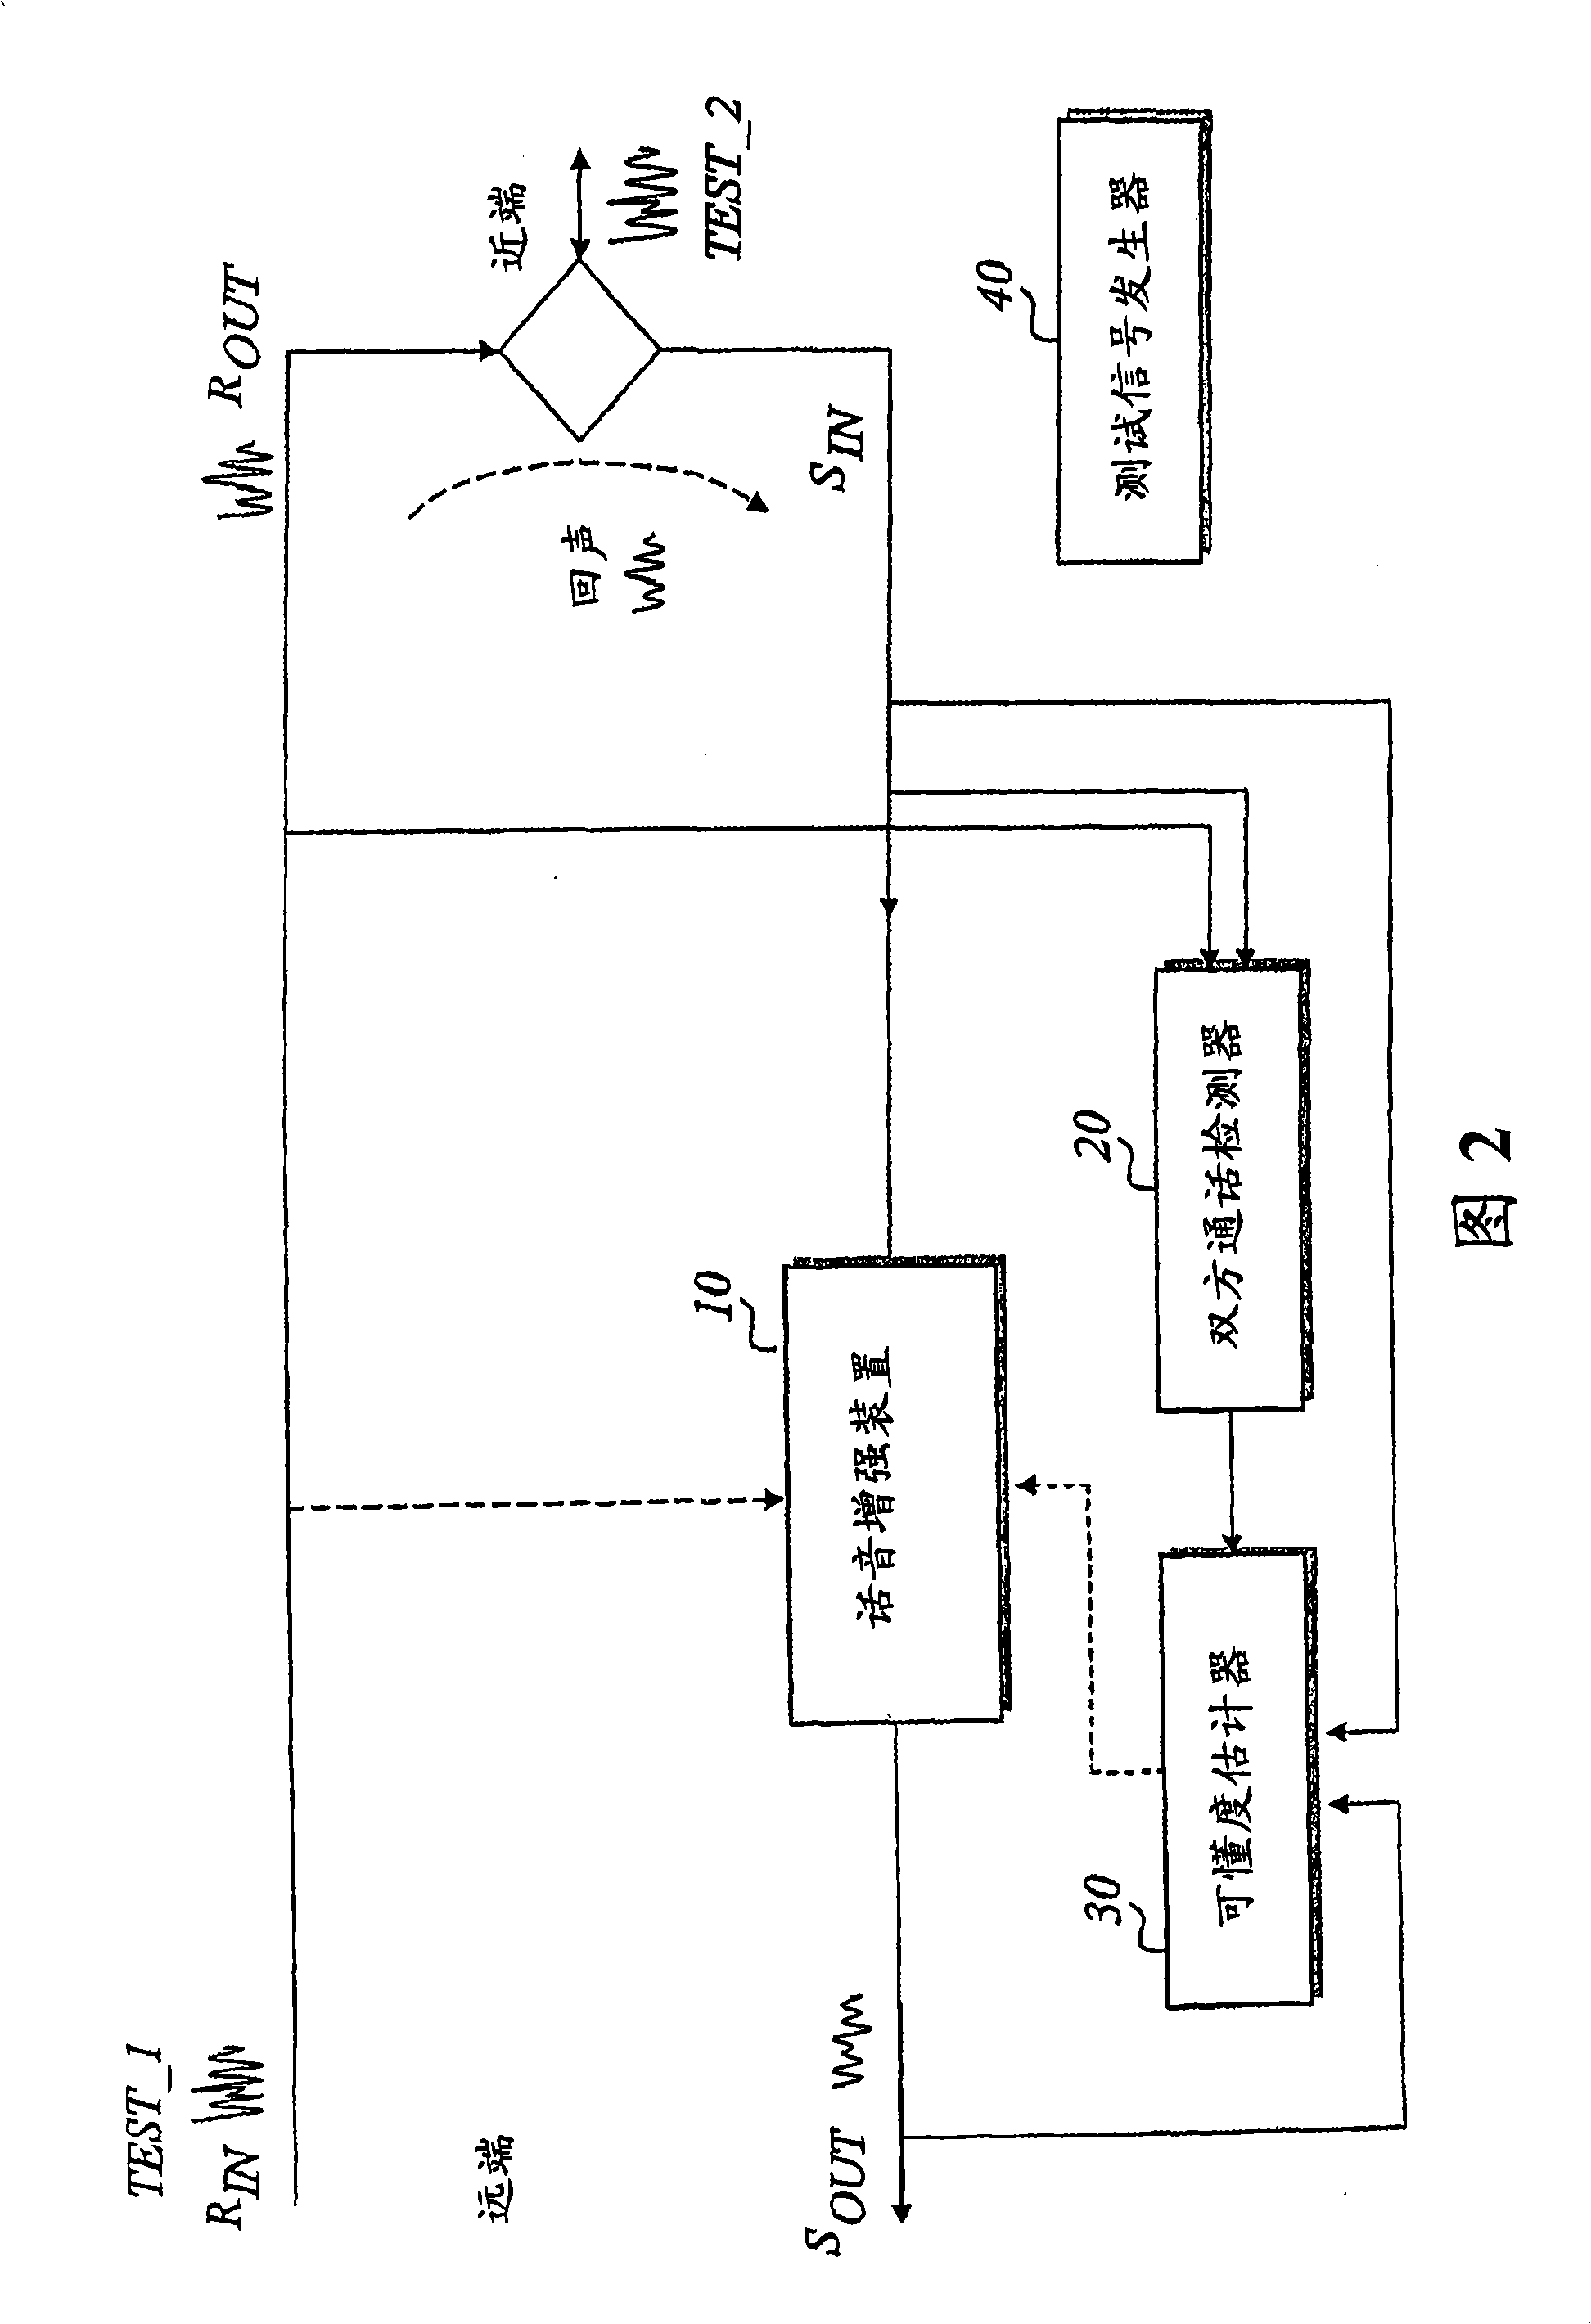 Method and test signal for measuring speech intelligibility